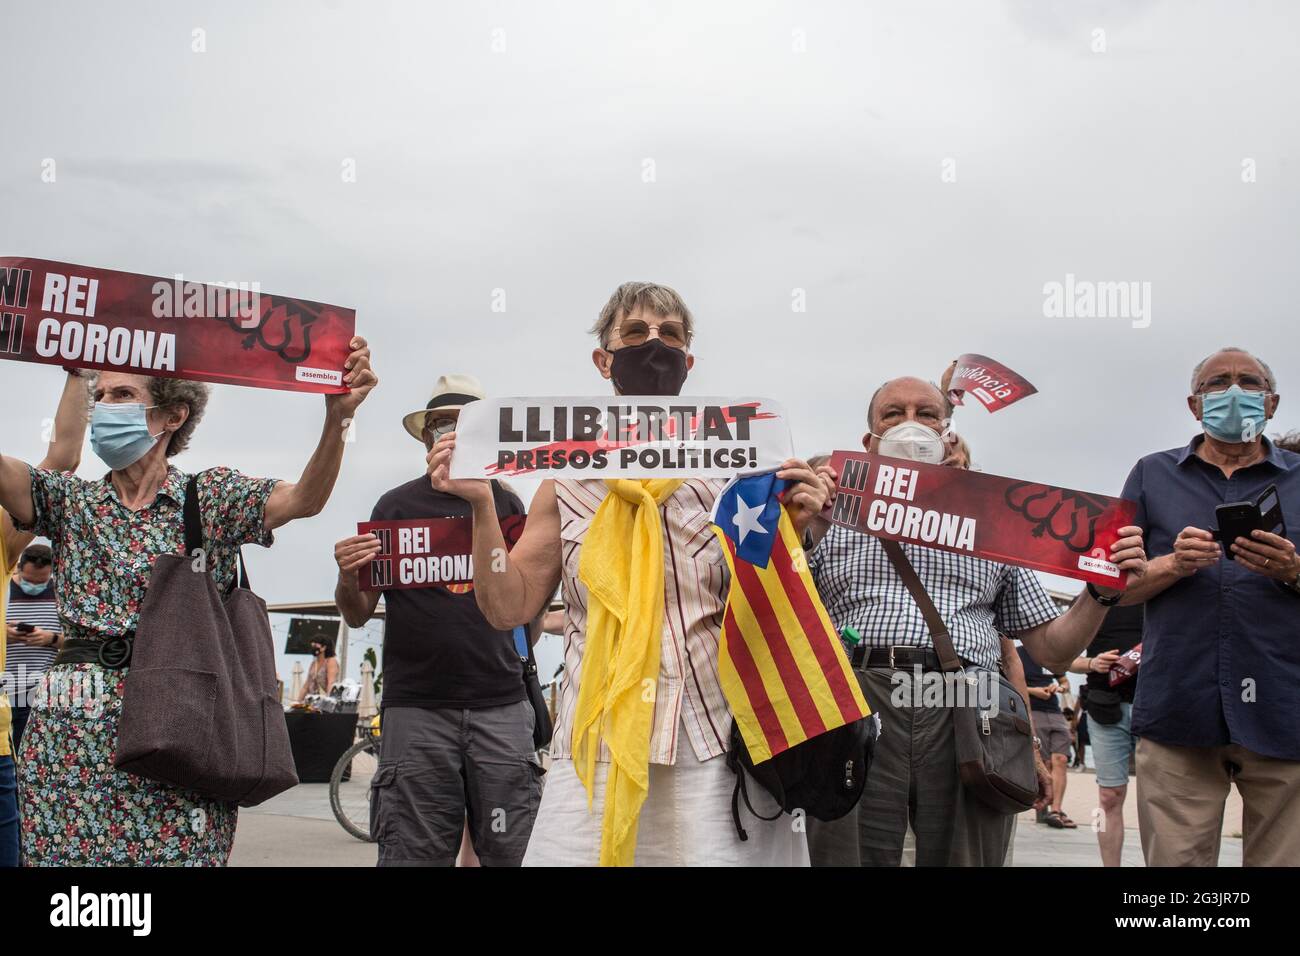 A protester with the Catalan independence flag holding a placard that reads, freedom political prisoners, during the demonstration.The Catalan association that aims at achieving the political independence of Catalonia, the Catalan National Assembly (ANC), has called a demonstration on Barceloneta close to Hotel W Barcelona where the Spanish king, Felipe VI attends the inaugural dinner of the Annual Meeting of the Barcelona business organization, Circulo de Economia (Economy Circle), to protest the presence of the monarch in the Catalan capital. The protesters have burned a large photo of Felip Stock Photo